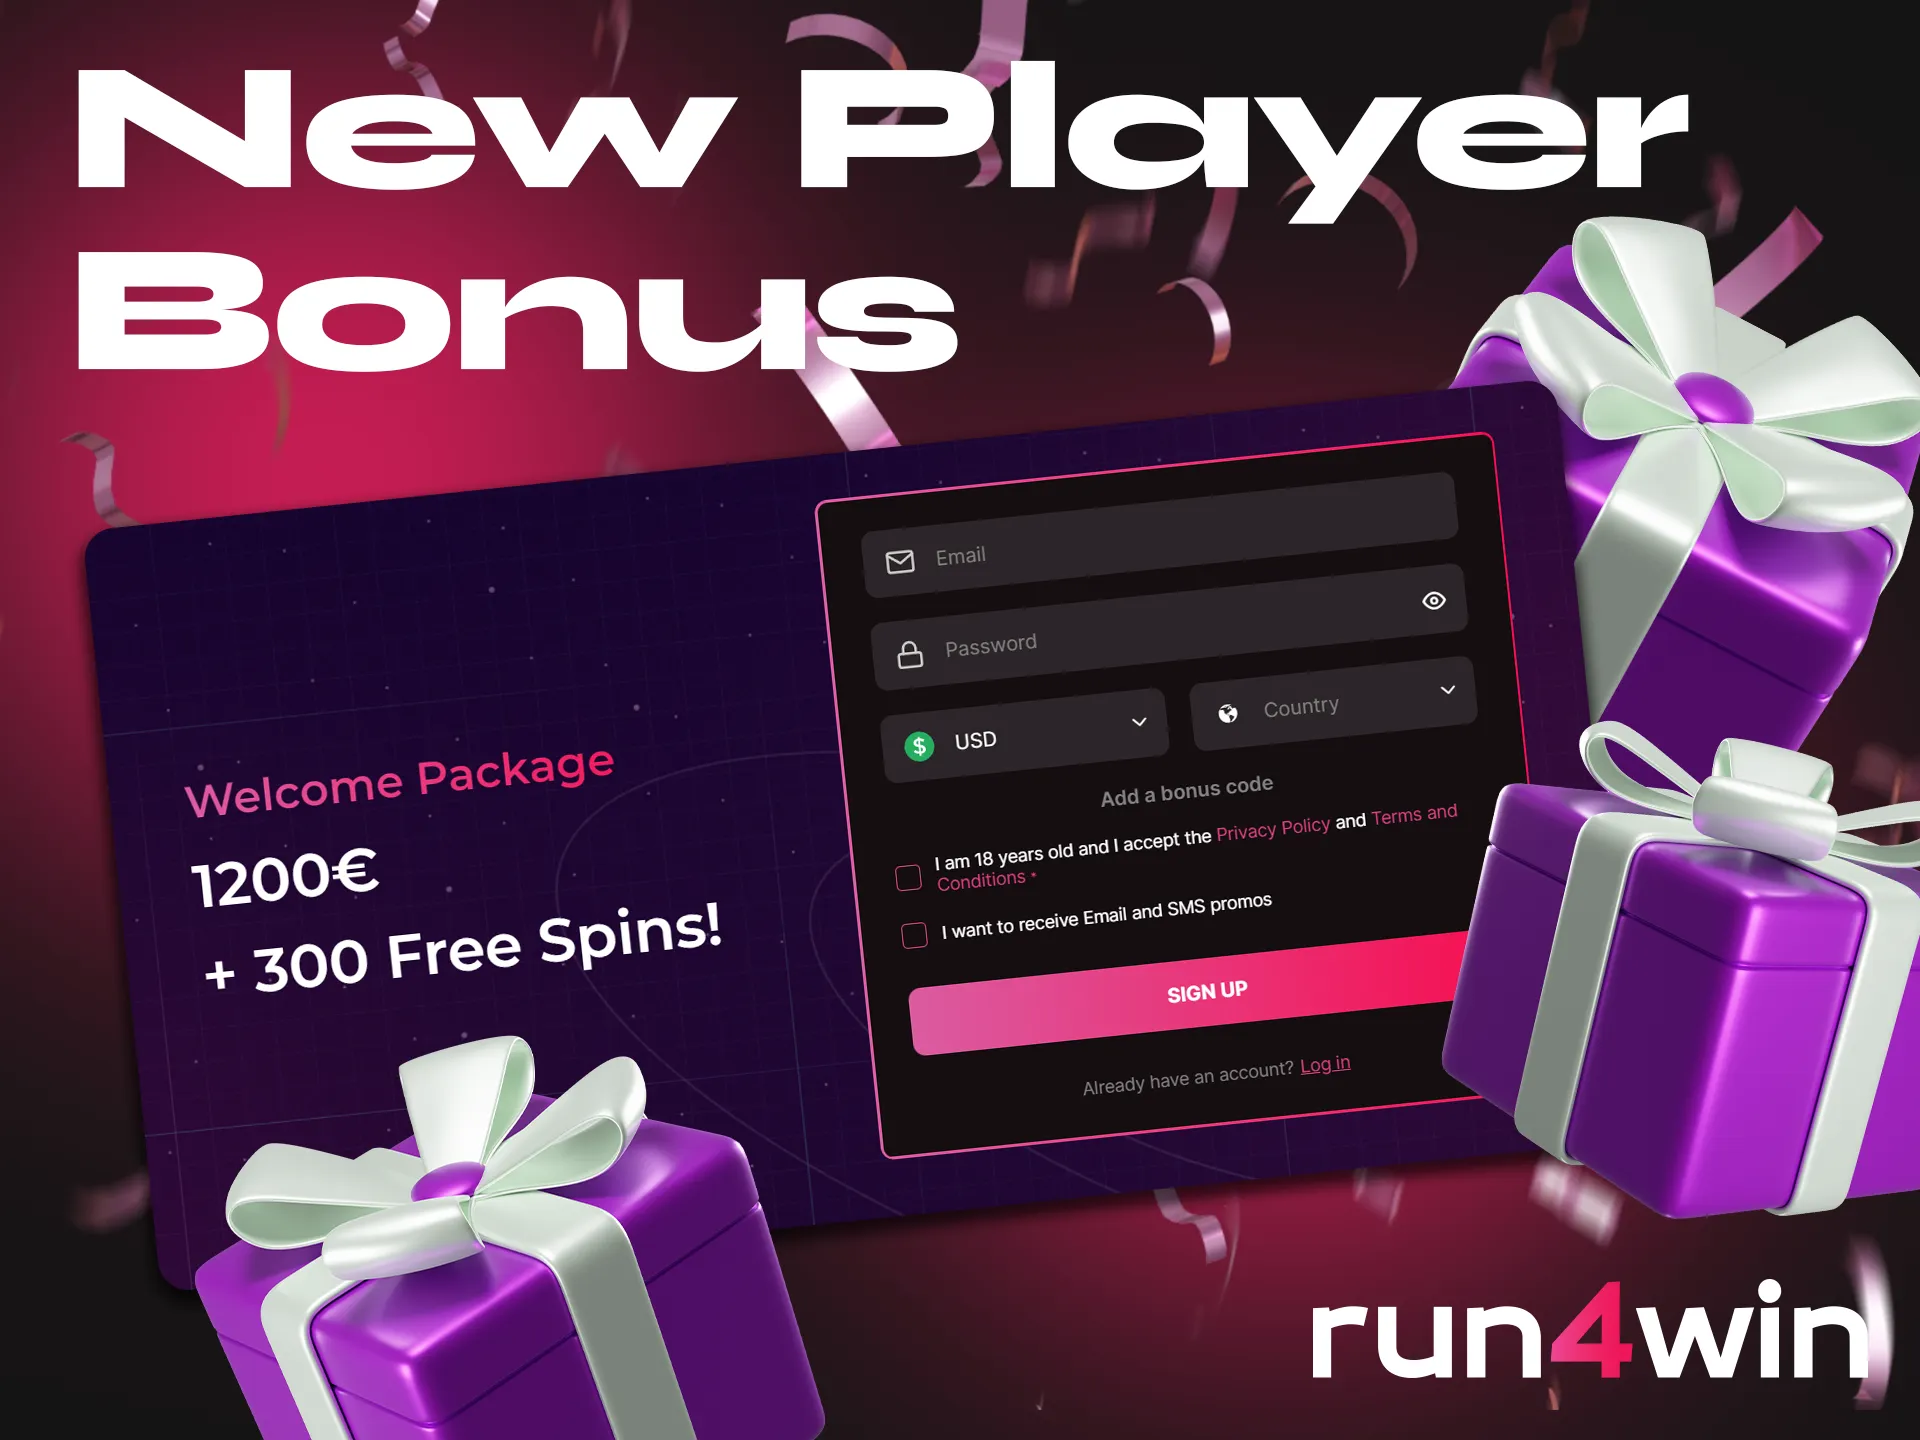 Run4Win Casino is giving a generous bonus for new players.